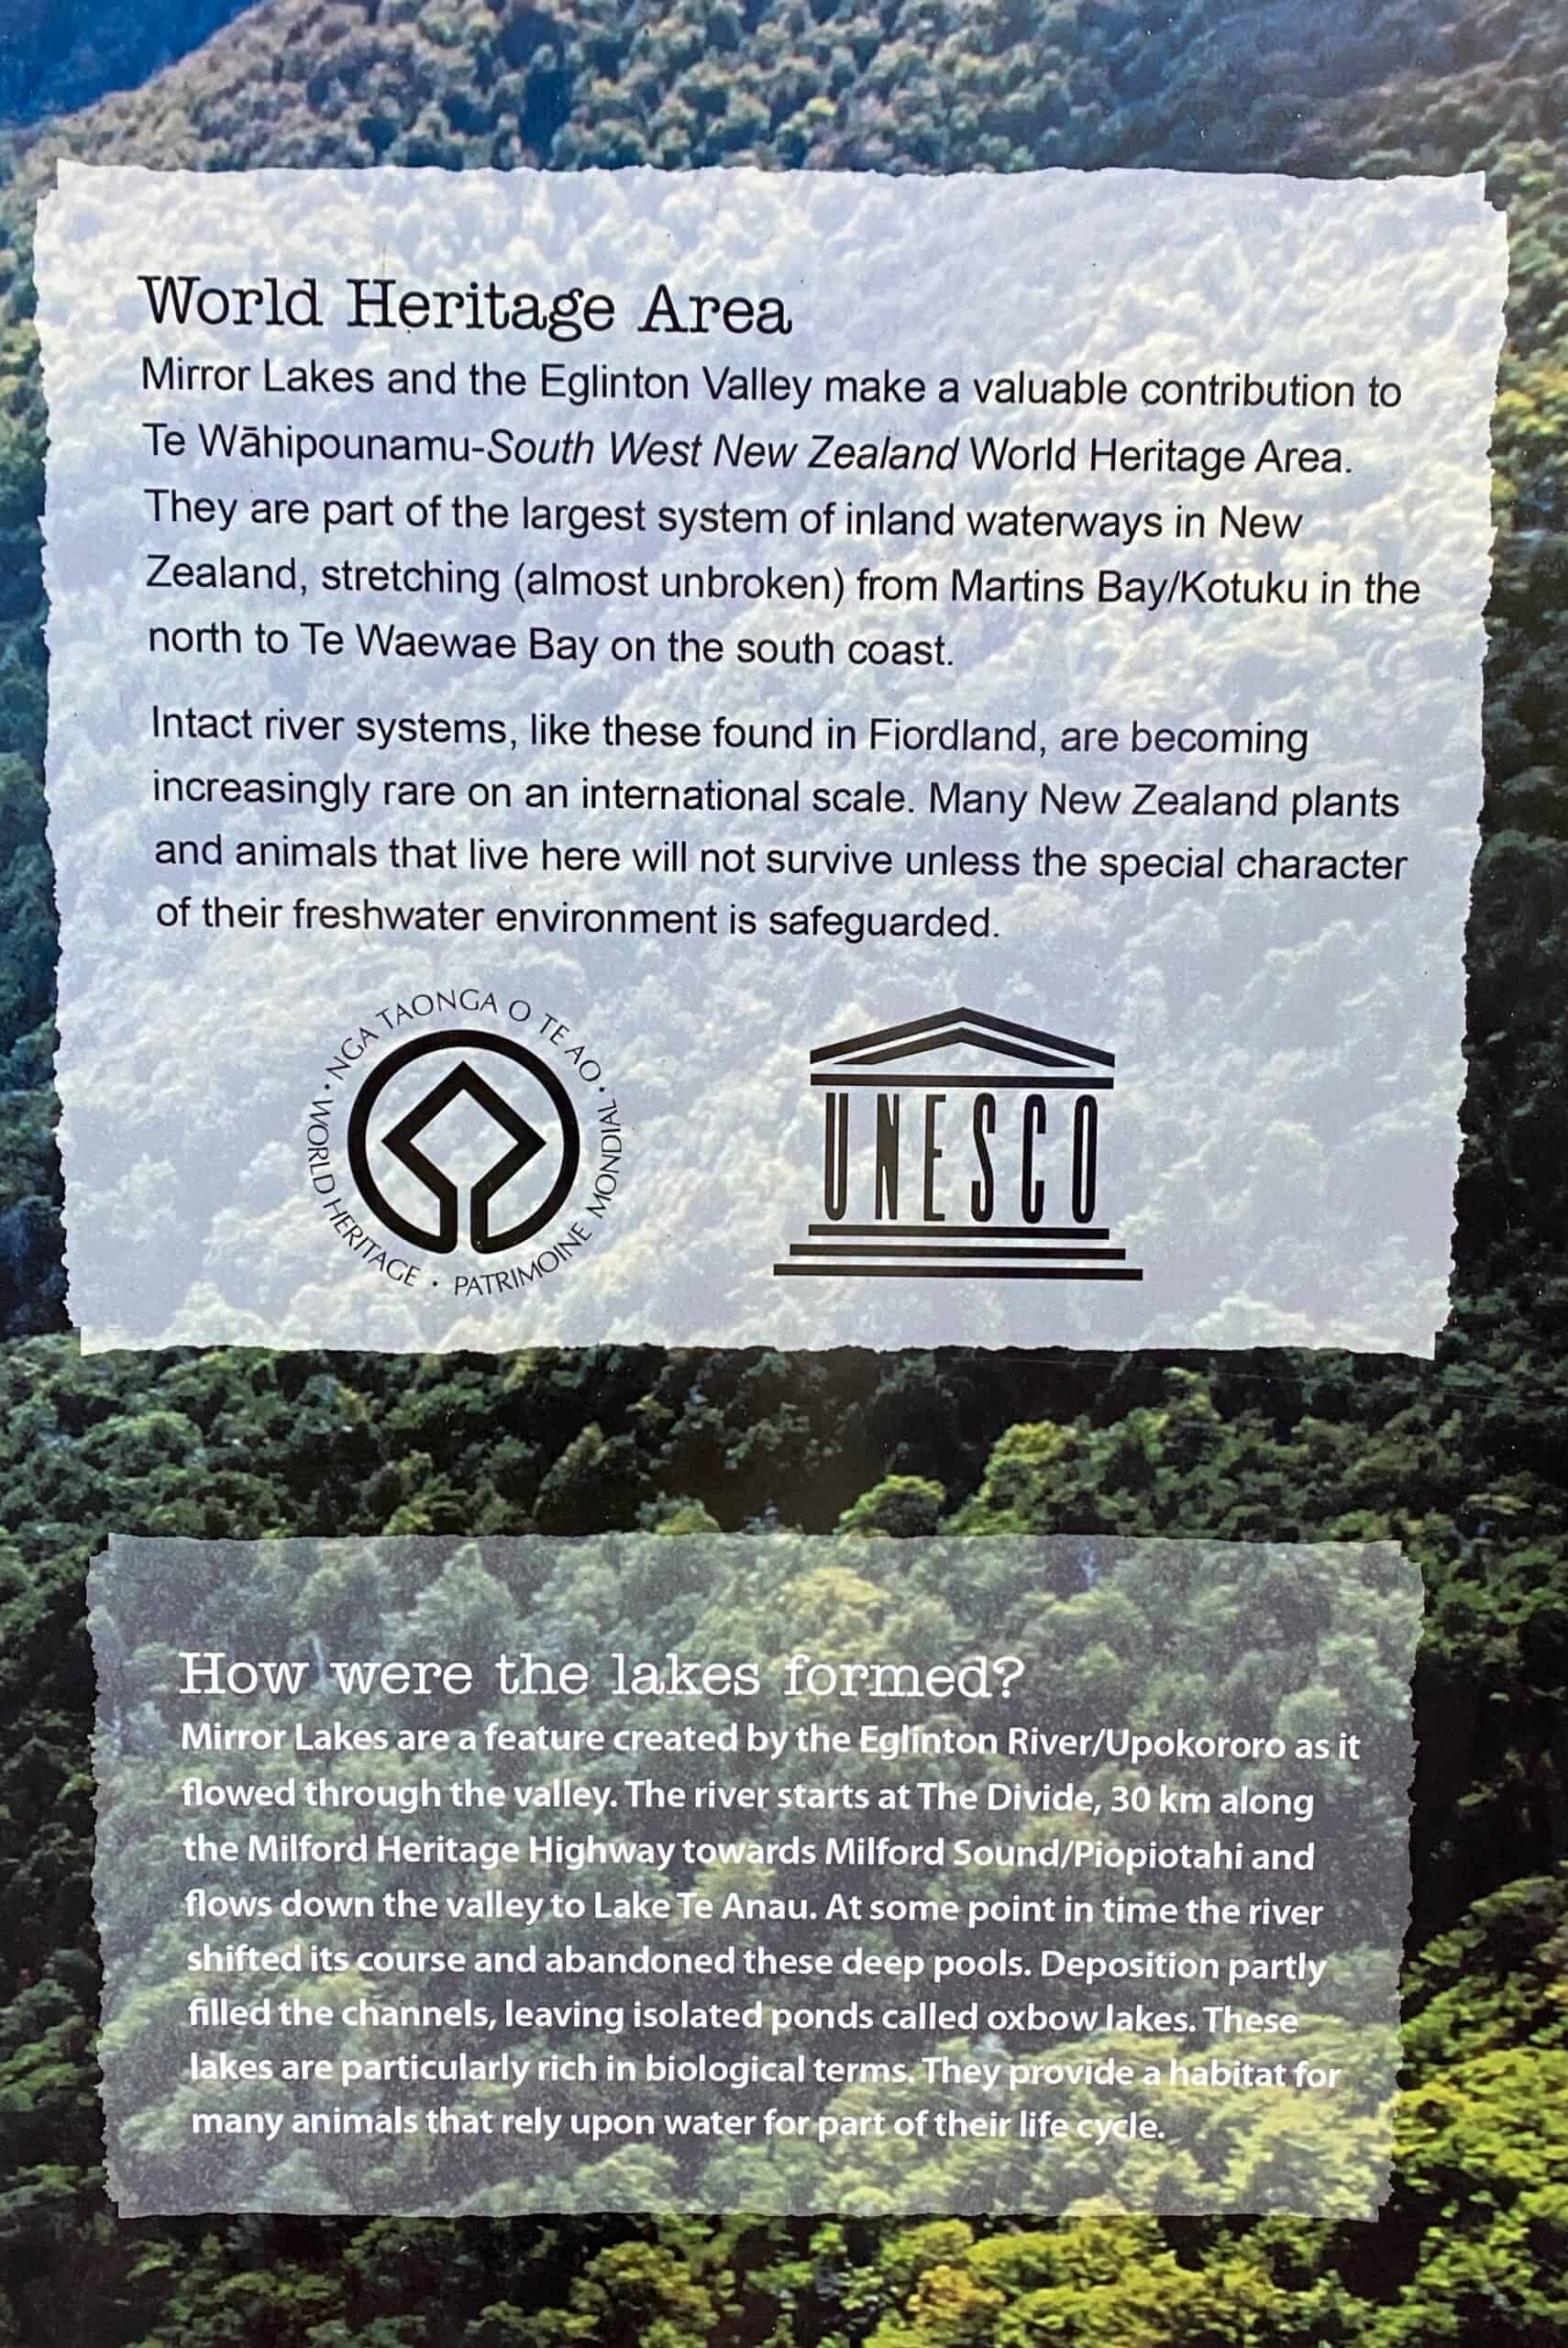 Preservation of the environment is very important in New Zealand such as designating UNESCO Heritage Areas